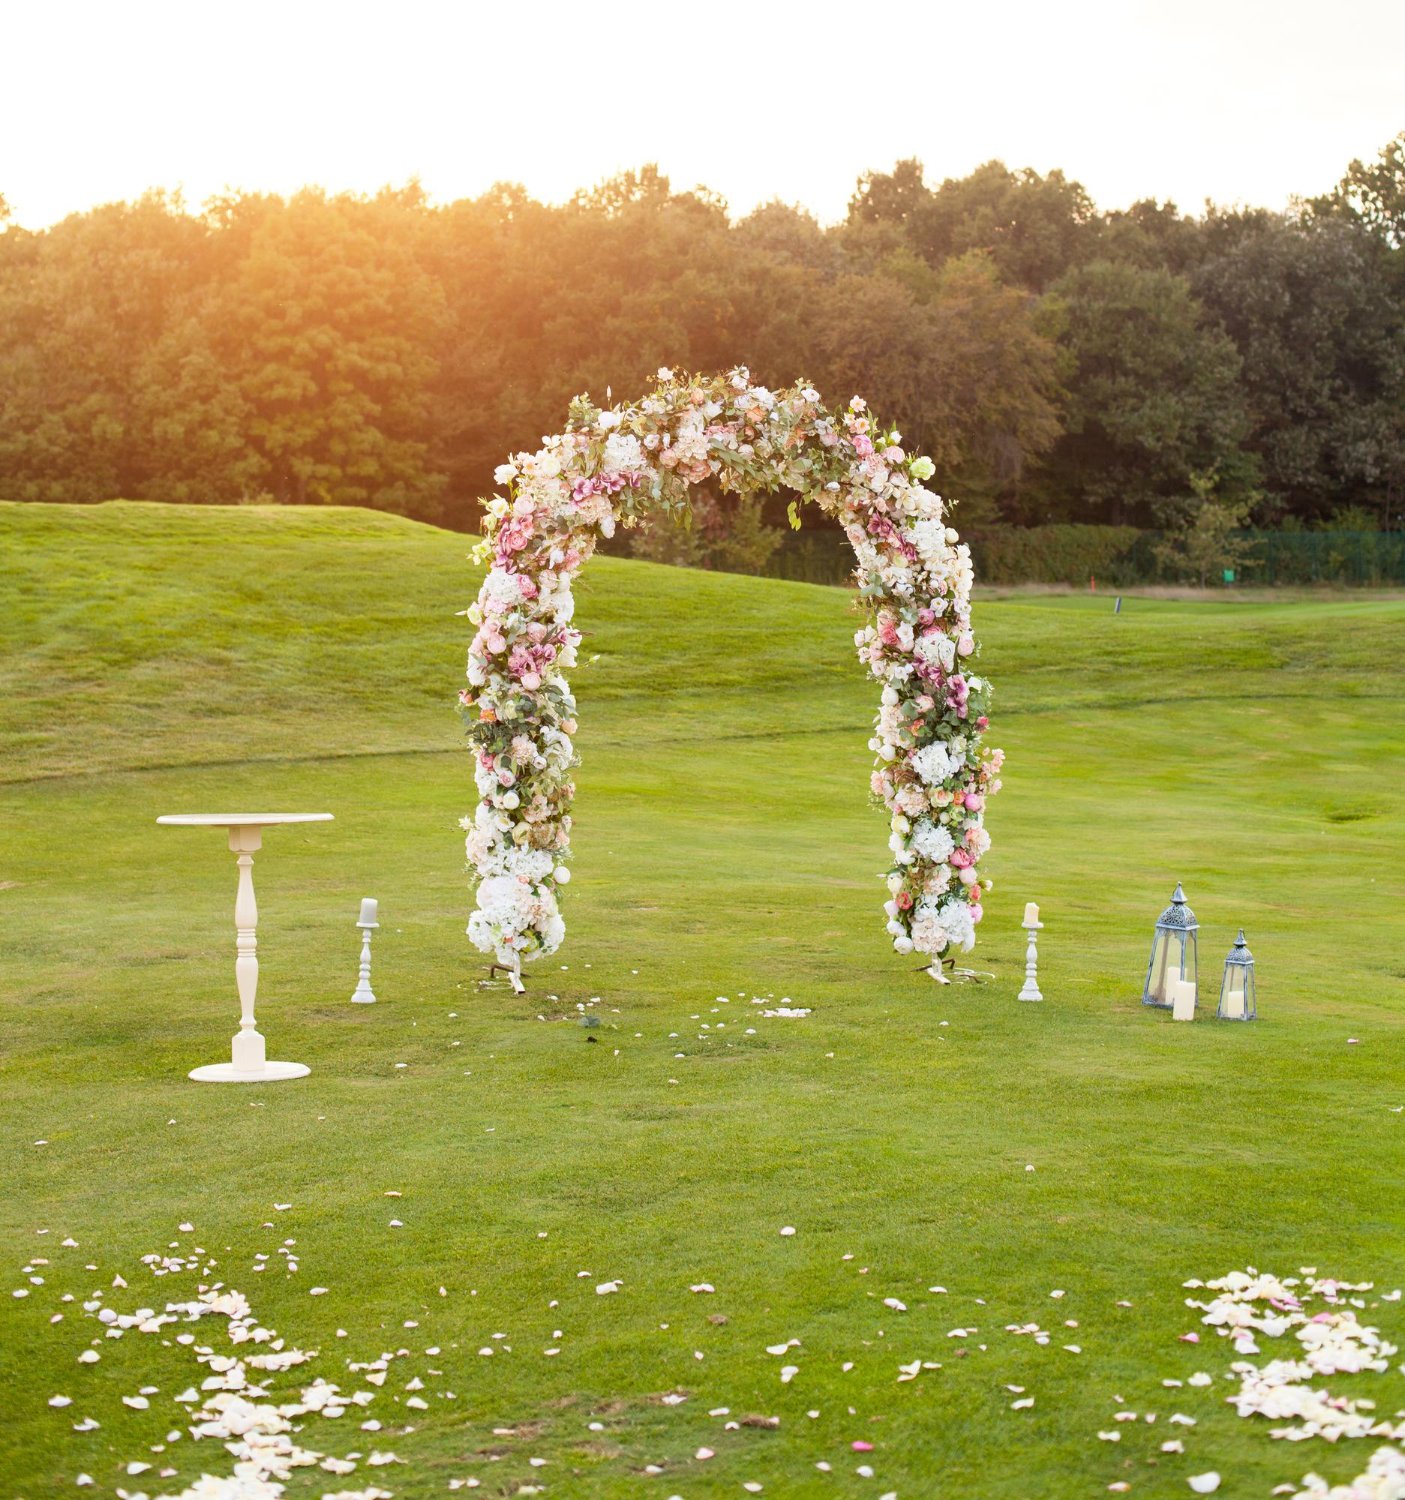  beautiful floral arch with lots of small purple pink and white flowers on the green field